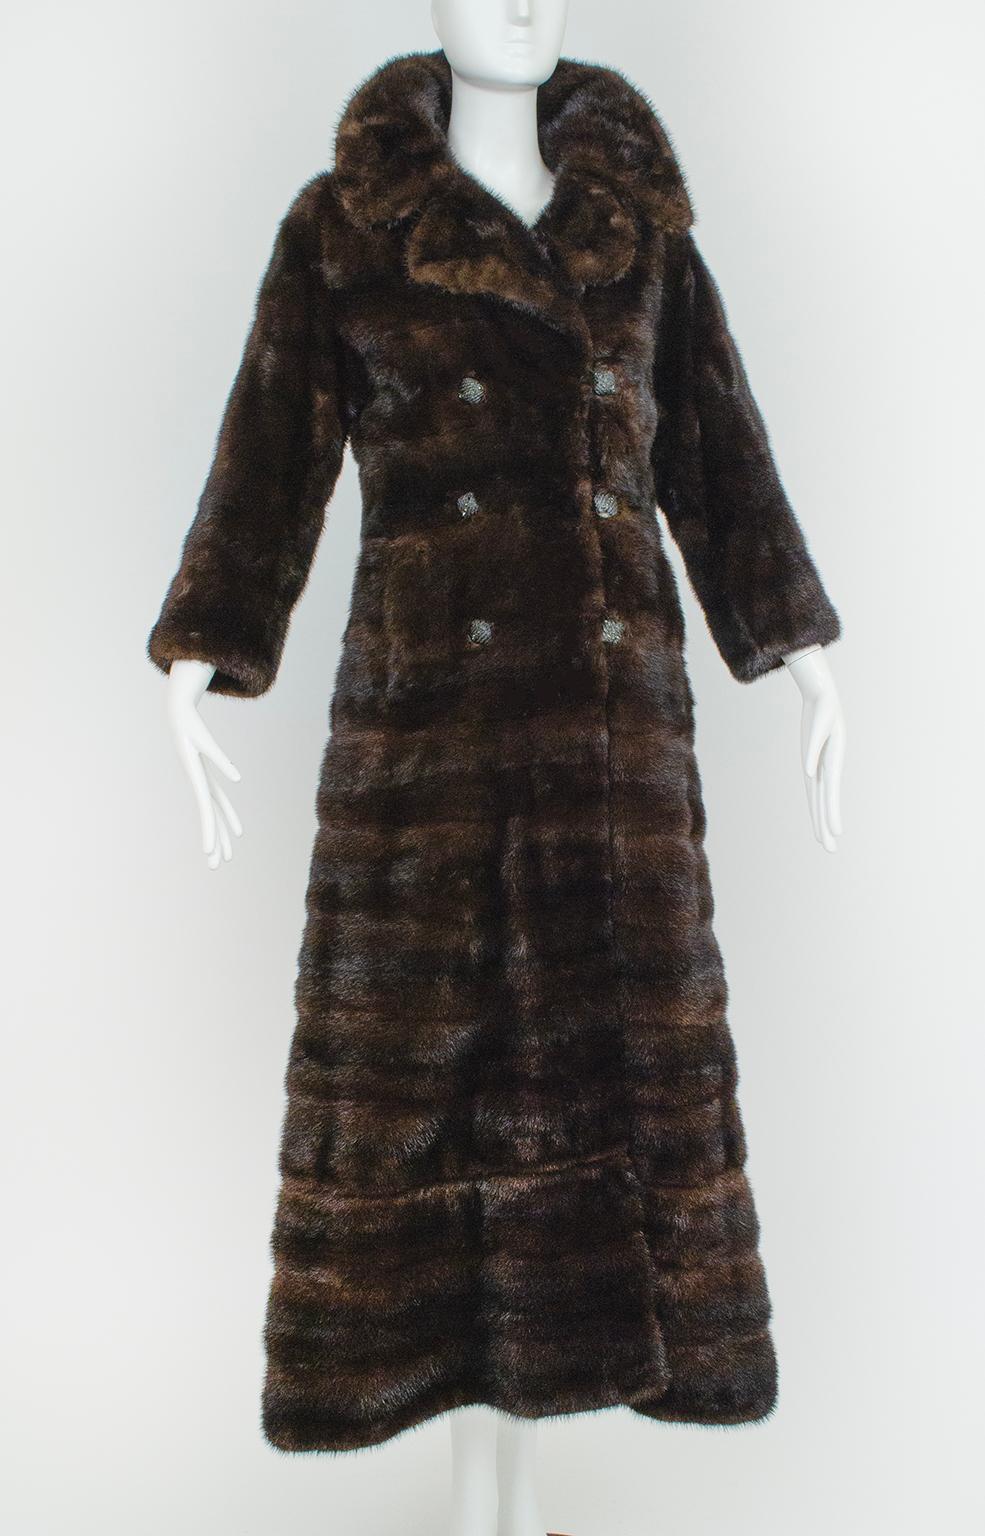 Custom made for its owner in 1971 and professionally stored since, this one-of-a-kind ranch mink coat is remarkable both for its beauty and its practicality. Its horizontal 5” pelts not only create a striking modern geometry, but also accentuate the